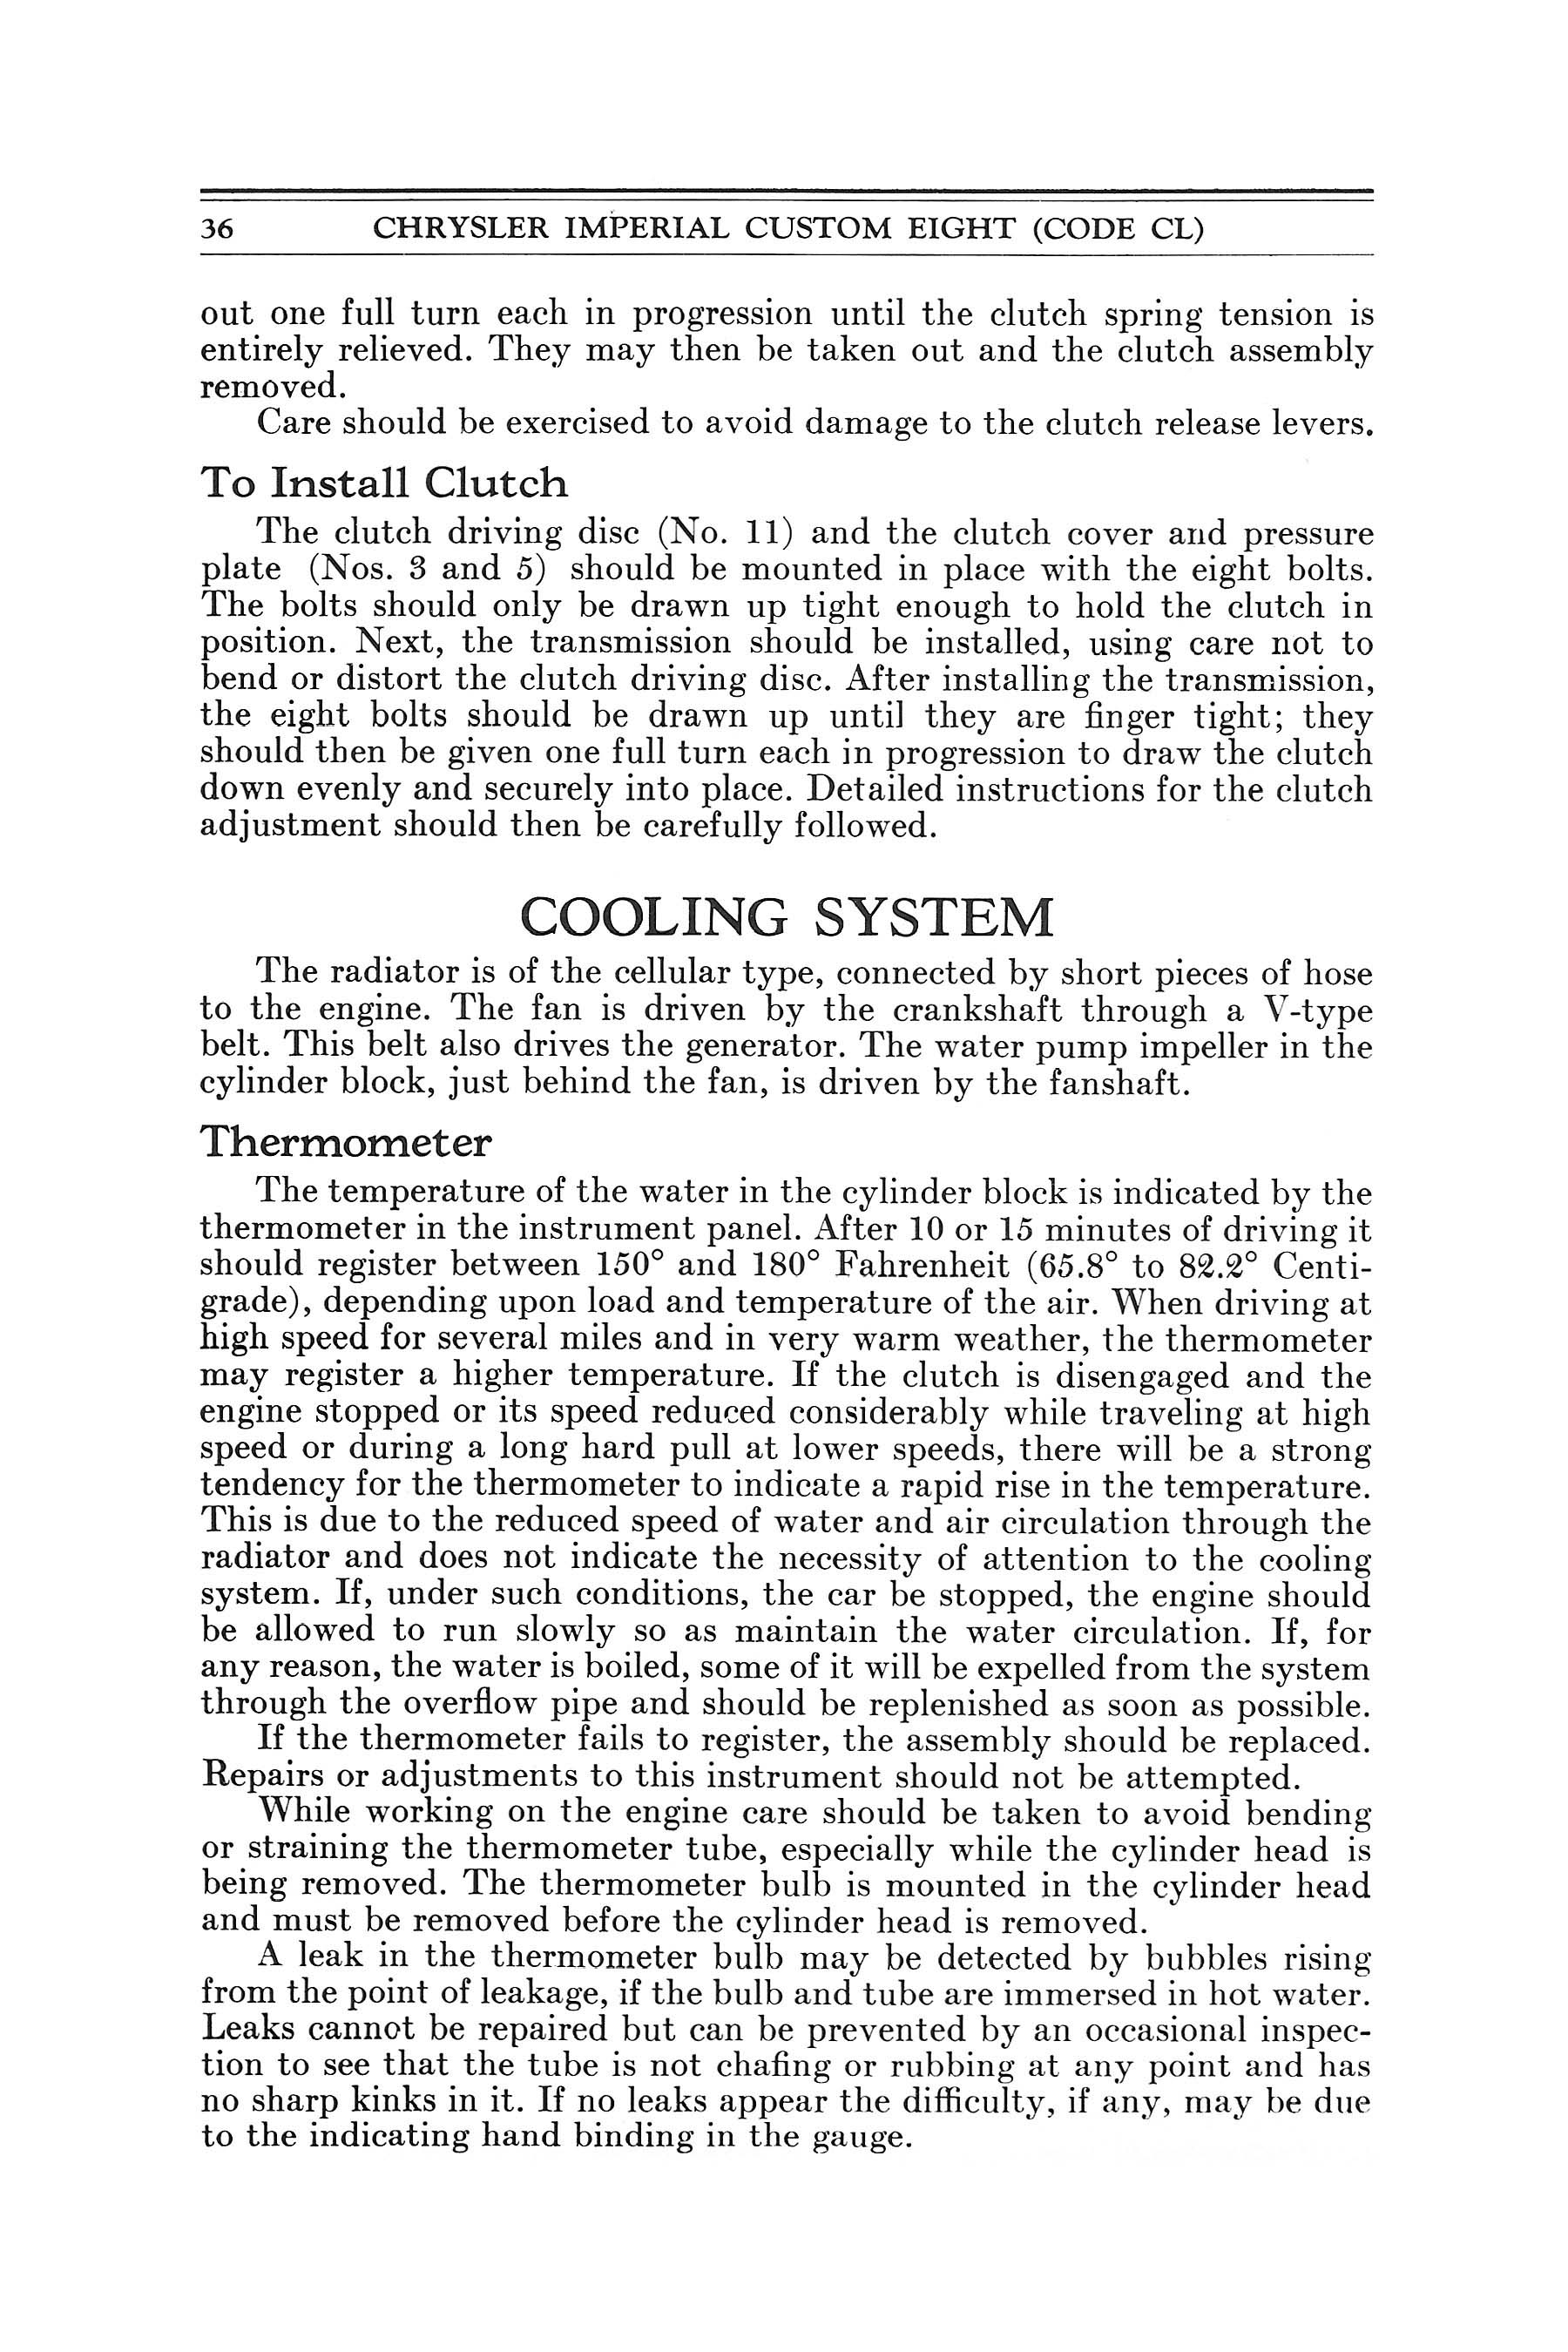 1932 Chrysler Imperial Instruction Book Page 50